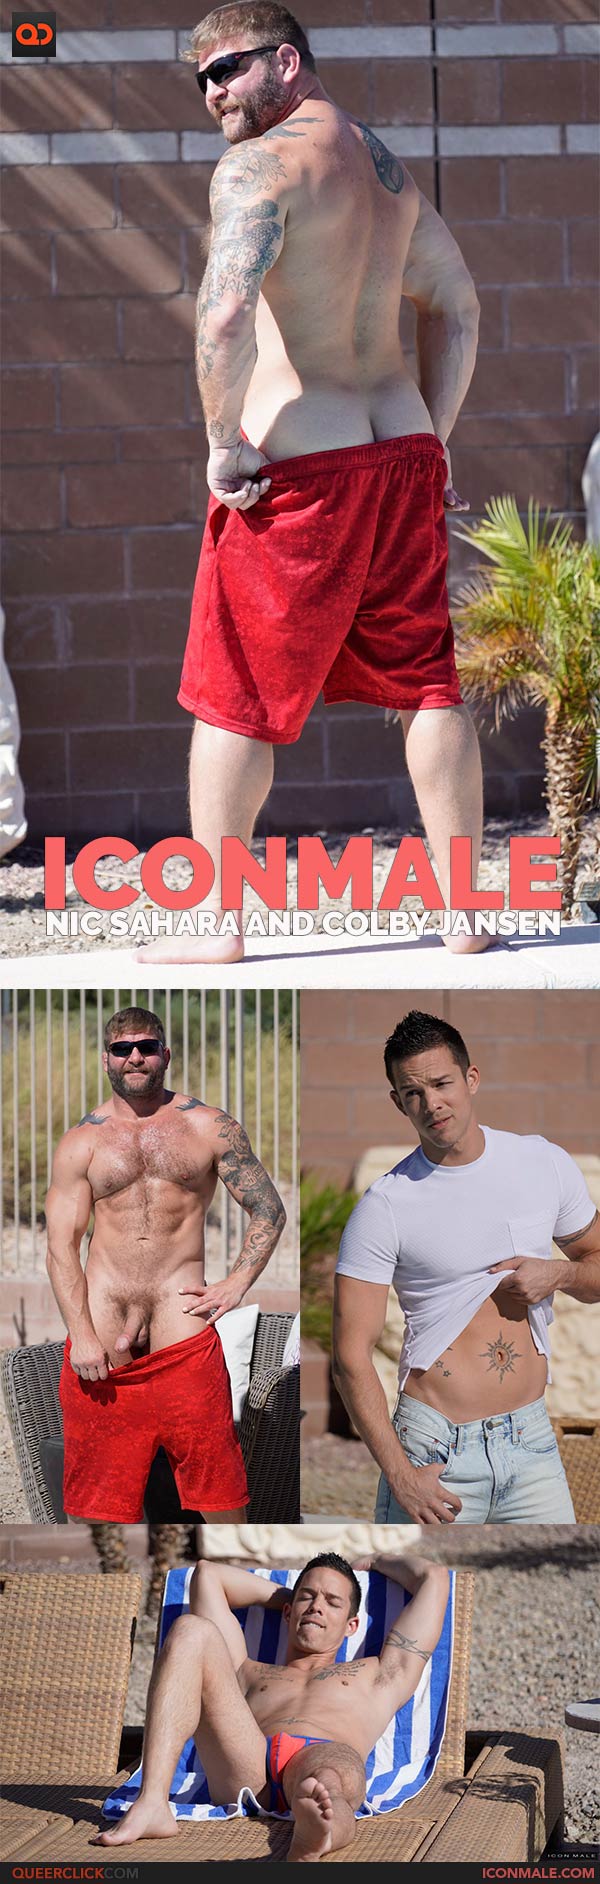 IconMale: Nic Sahara and Colby Jansen